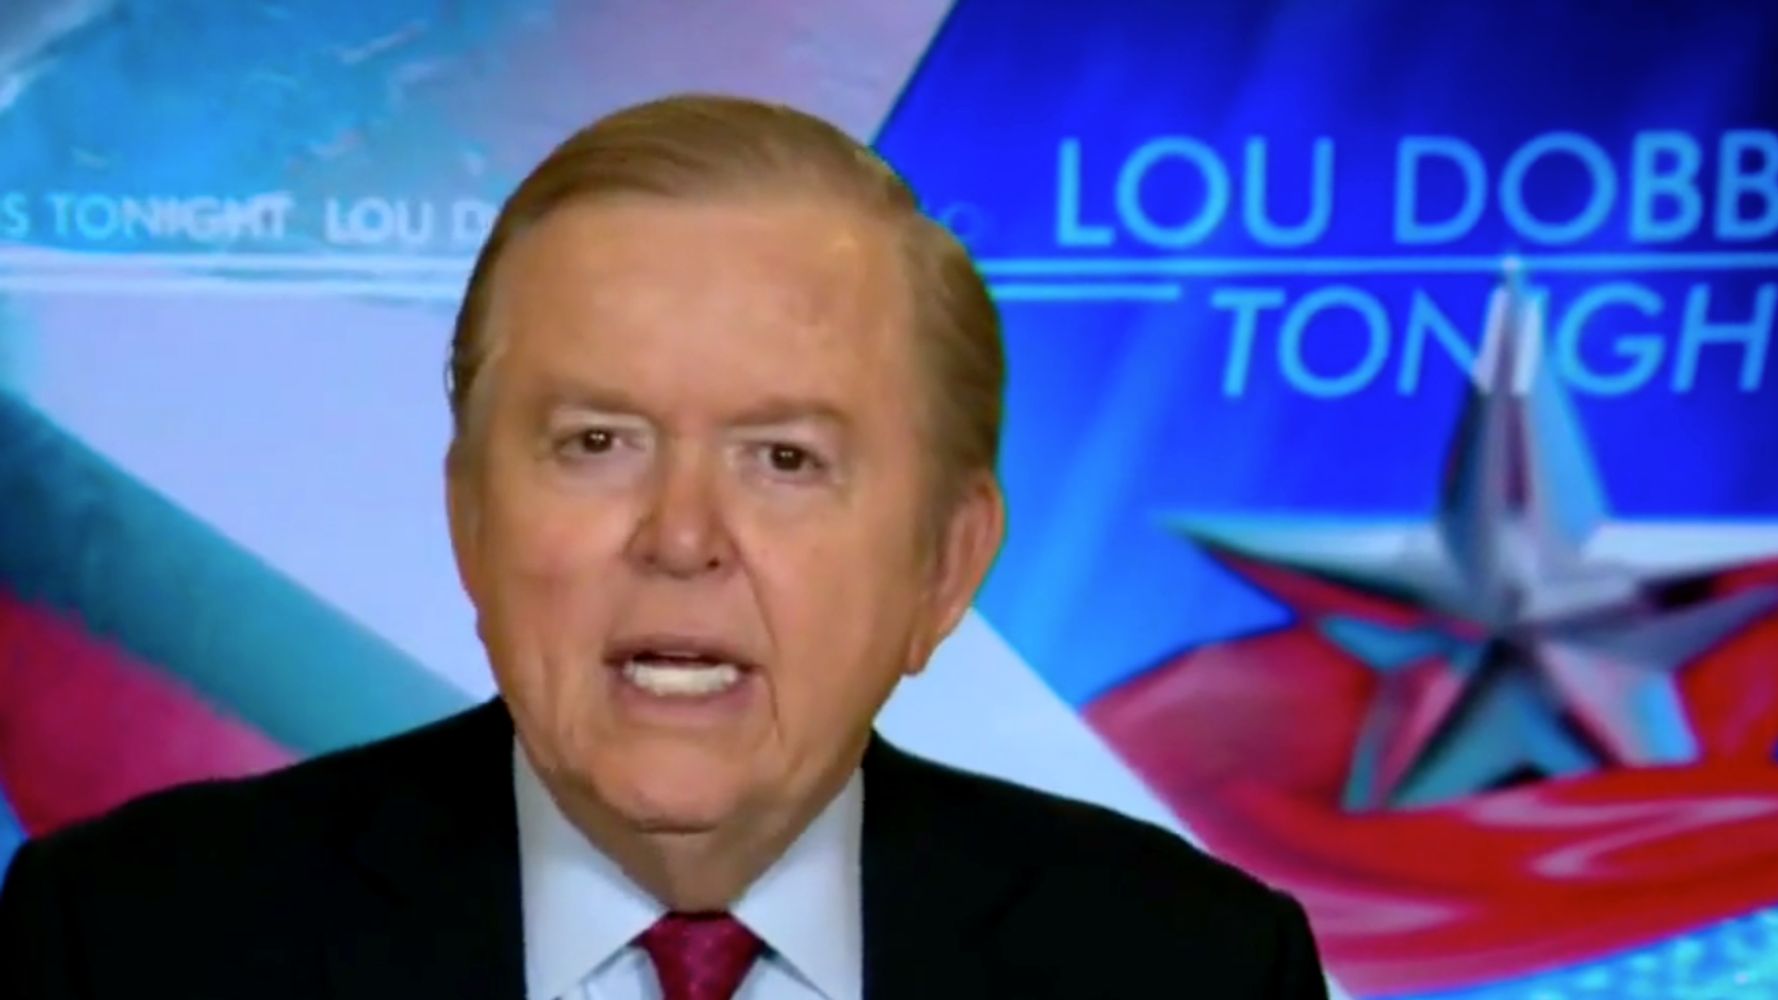 Lou Dobbs Rages At William Barr, Suggests He Might Be 'Compromised' Or 'Ill'